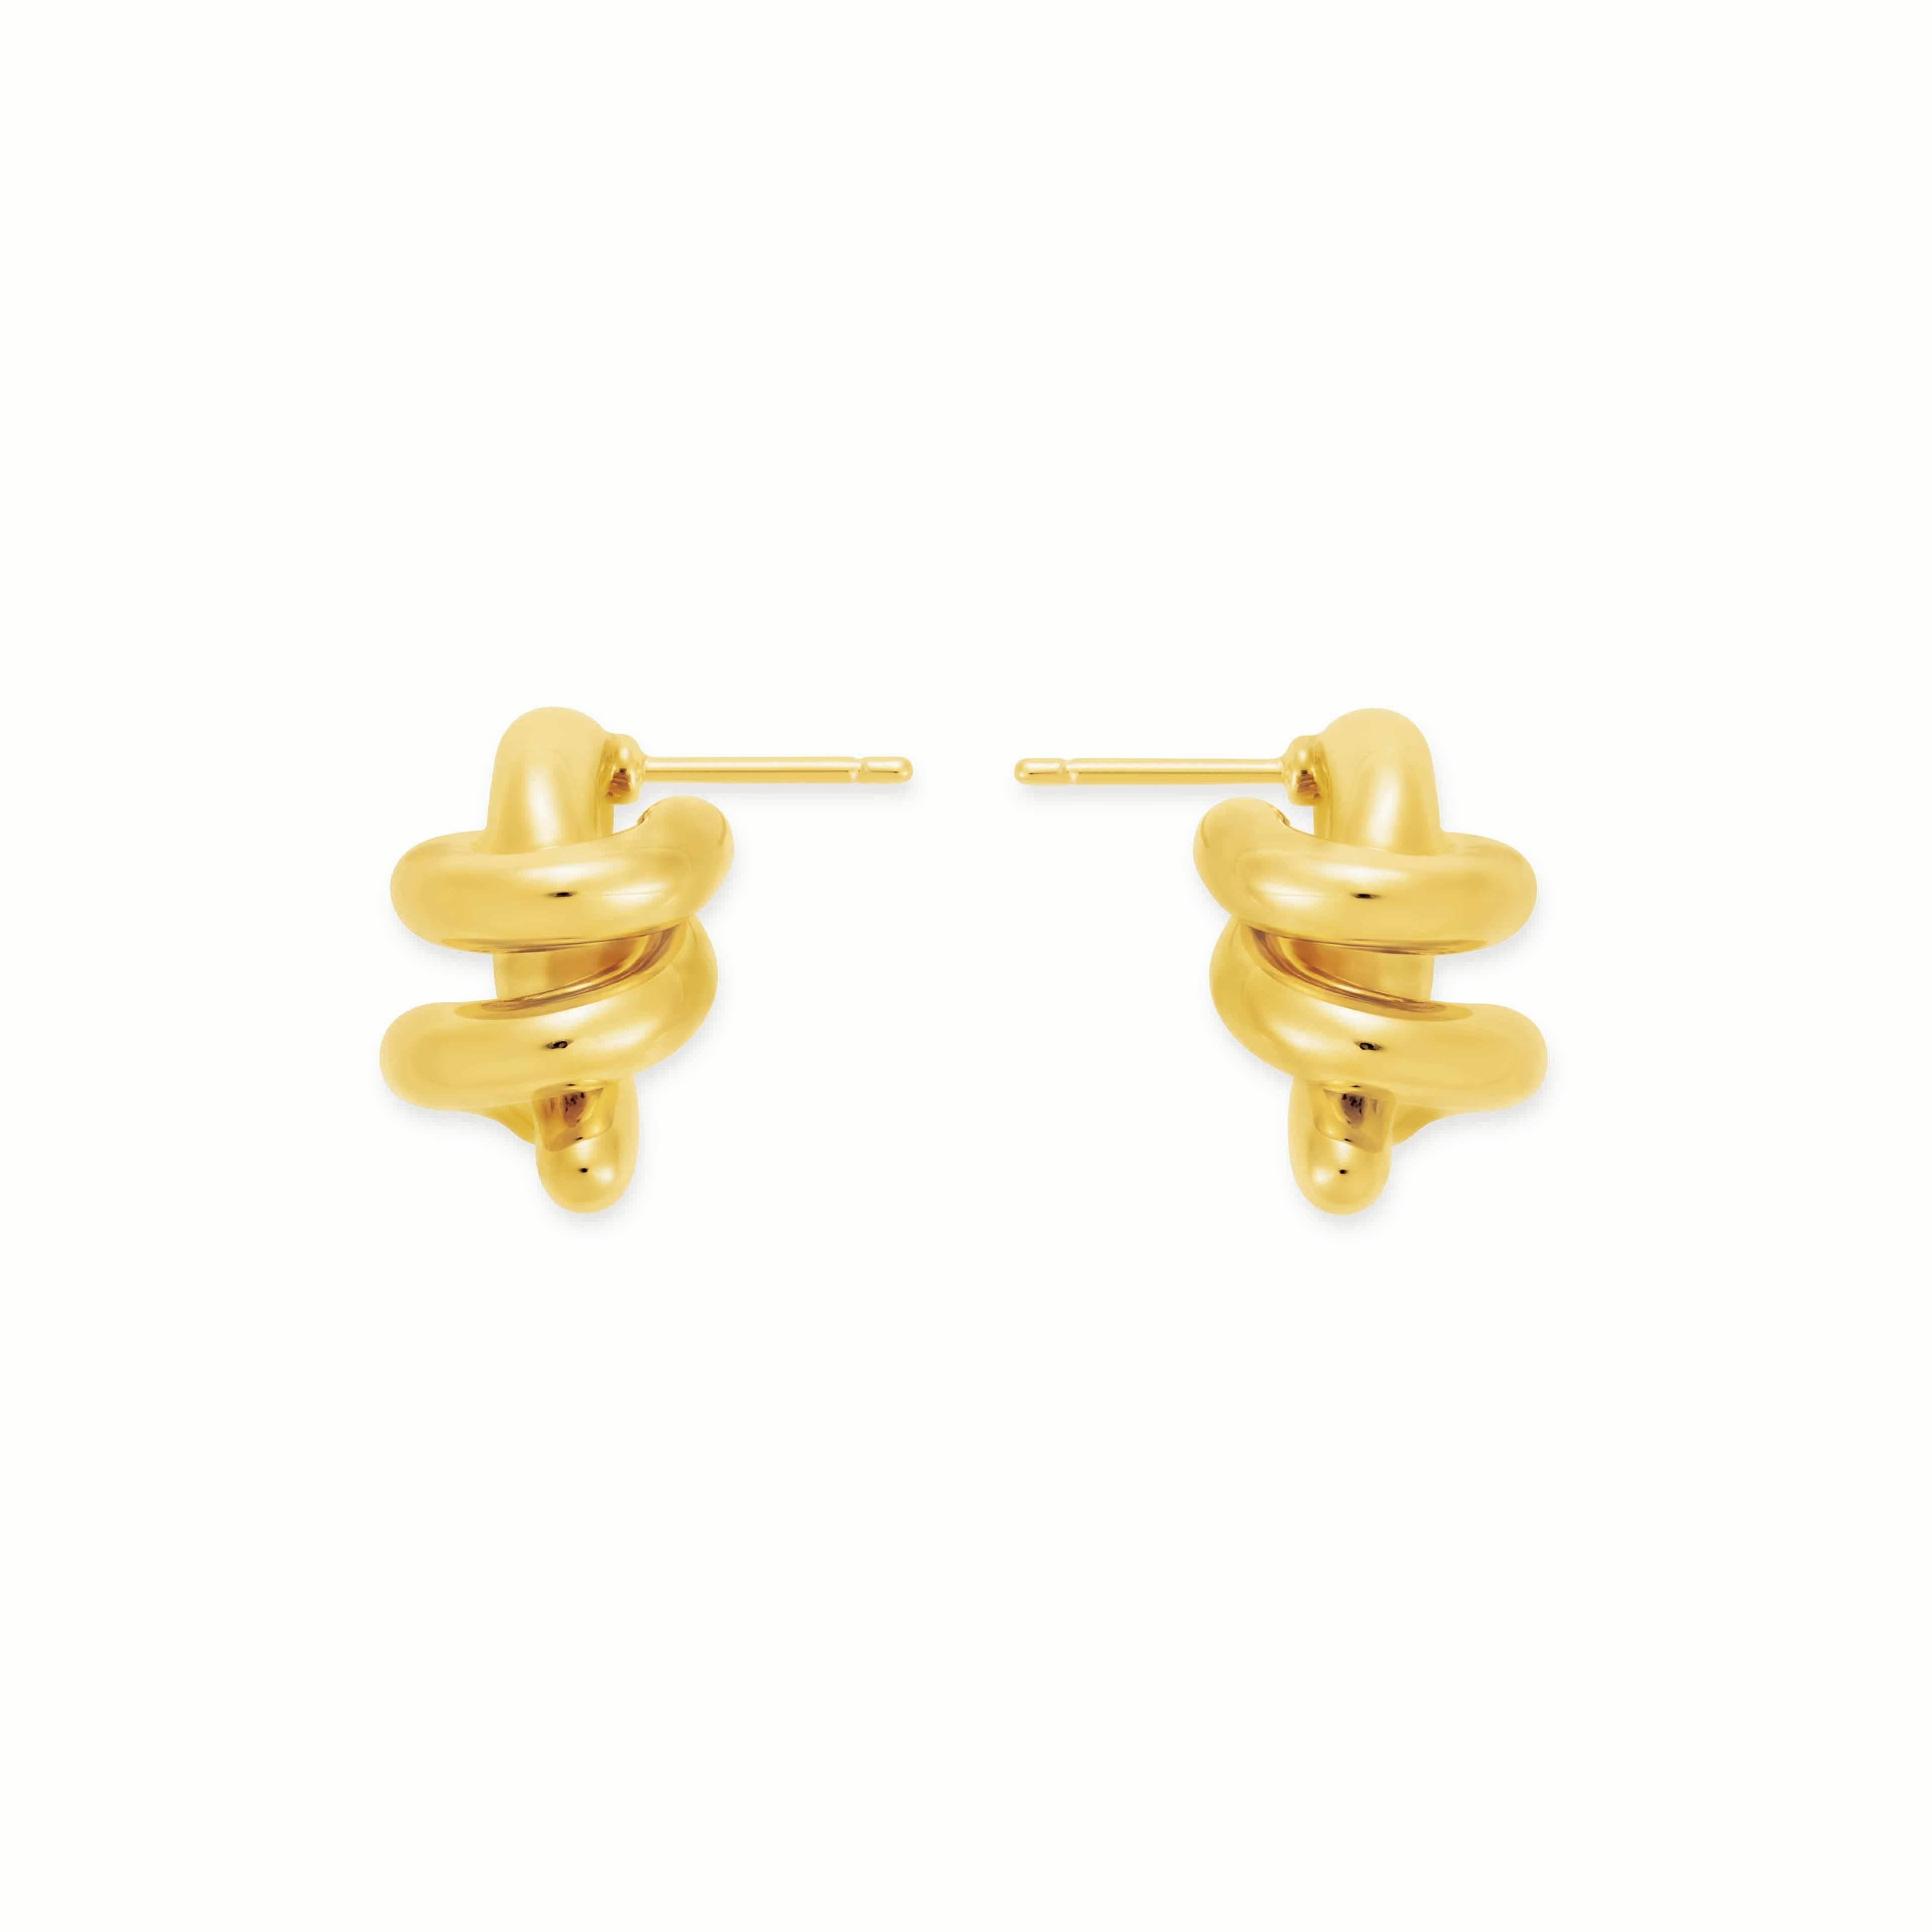 Mistova's Gold Expansion Earrings are inspired by sculptural forms. These earrings are made from 18k gold and have a hollow structure, providing the wearer comfort. Made from 18K gold.

